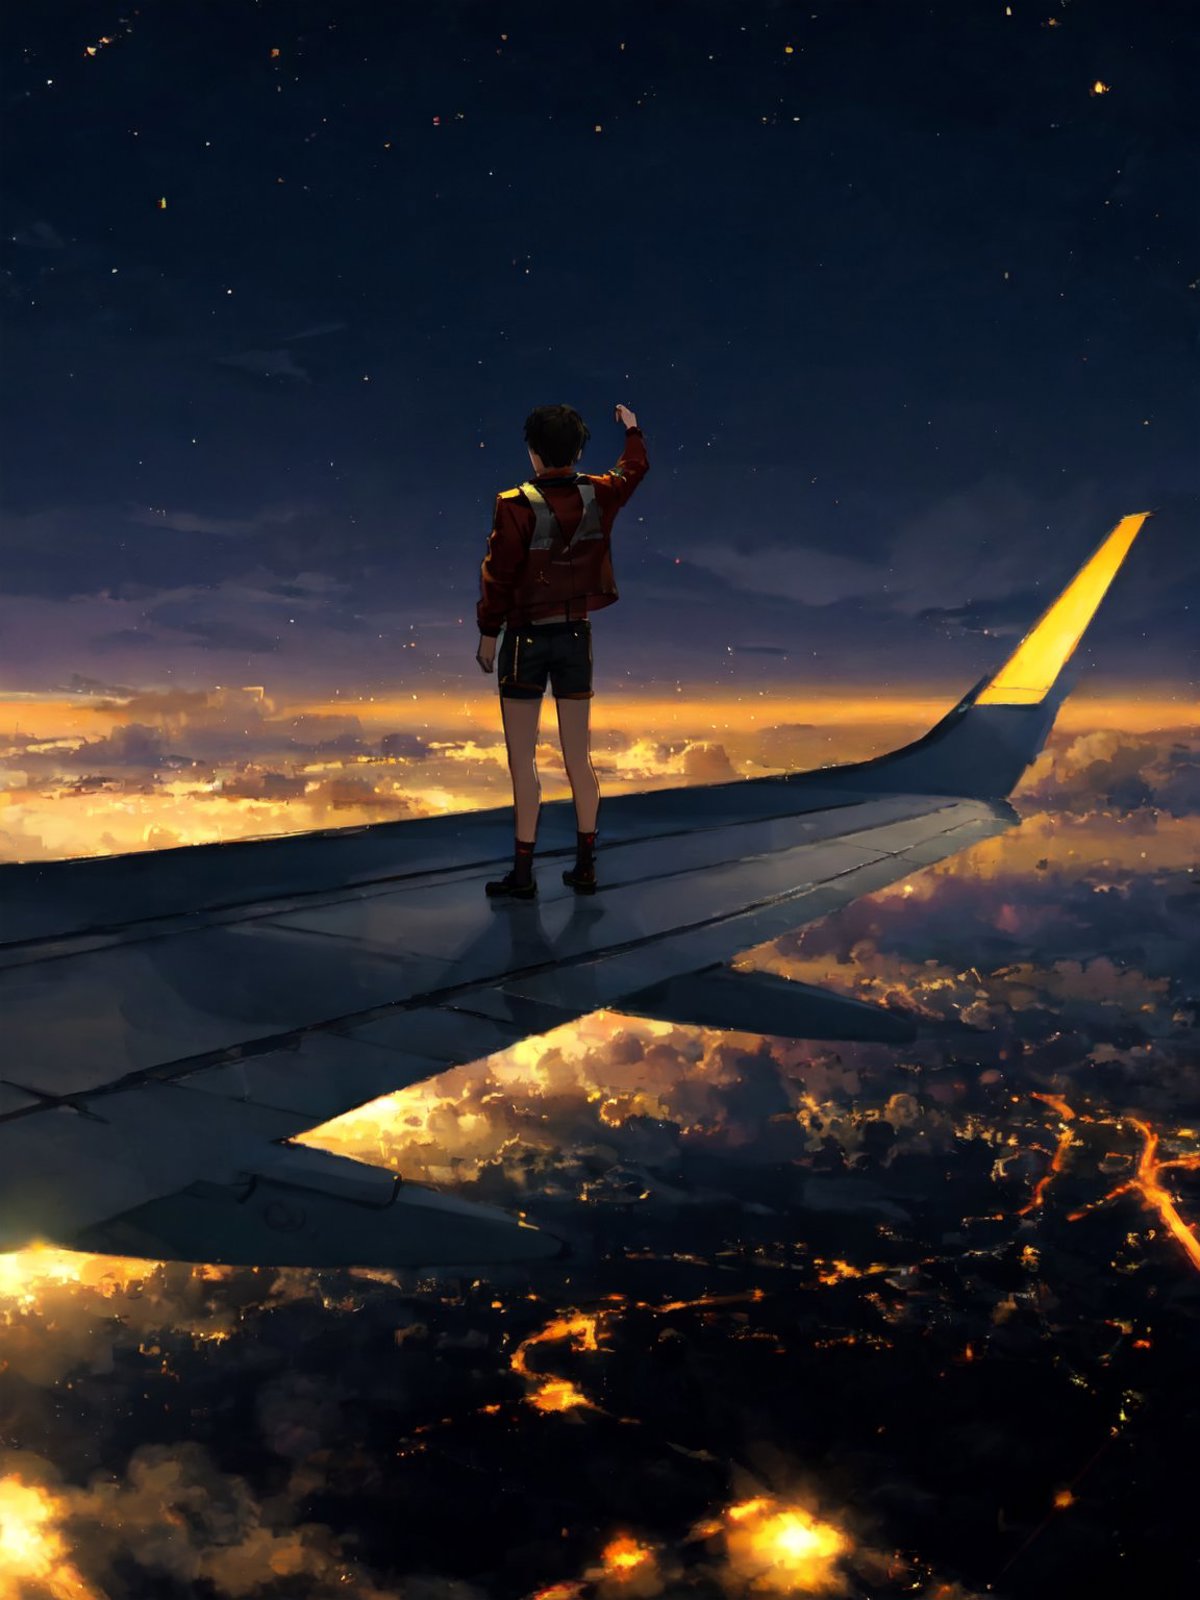 Airplane Wing Pose Concept image by ARTik_31